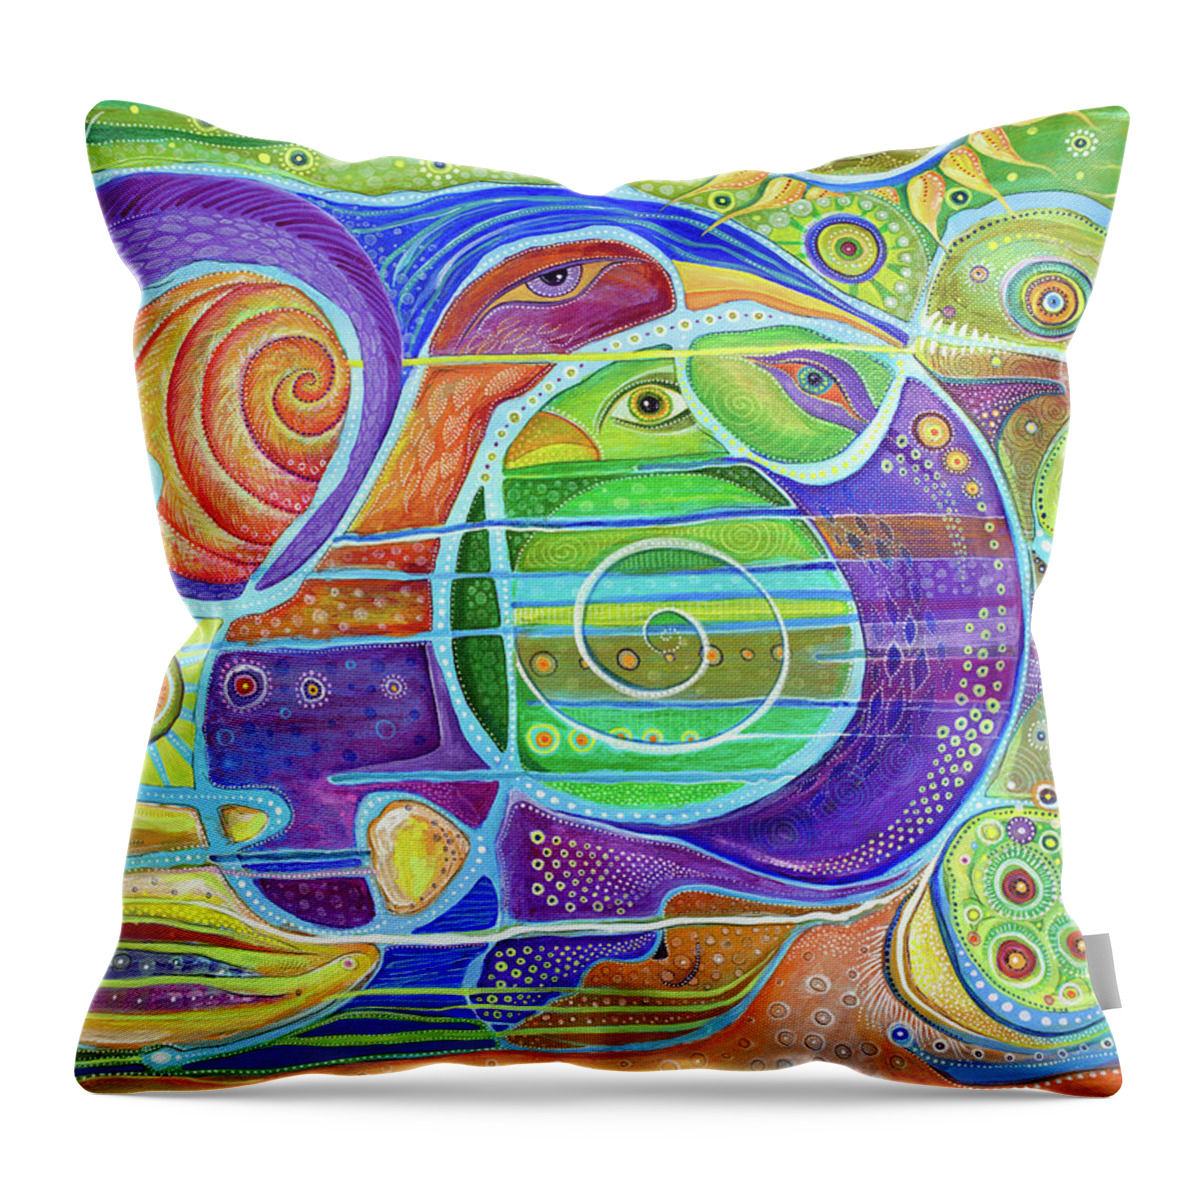 Rising Again Throw Pillow featuring the painting Rising Again - The Strength of the Human Spirit by Tanielle Childers